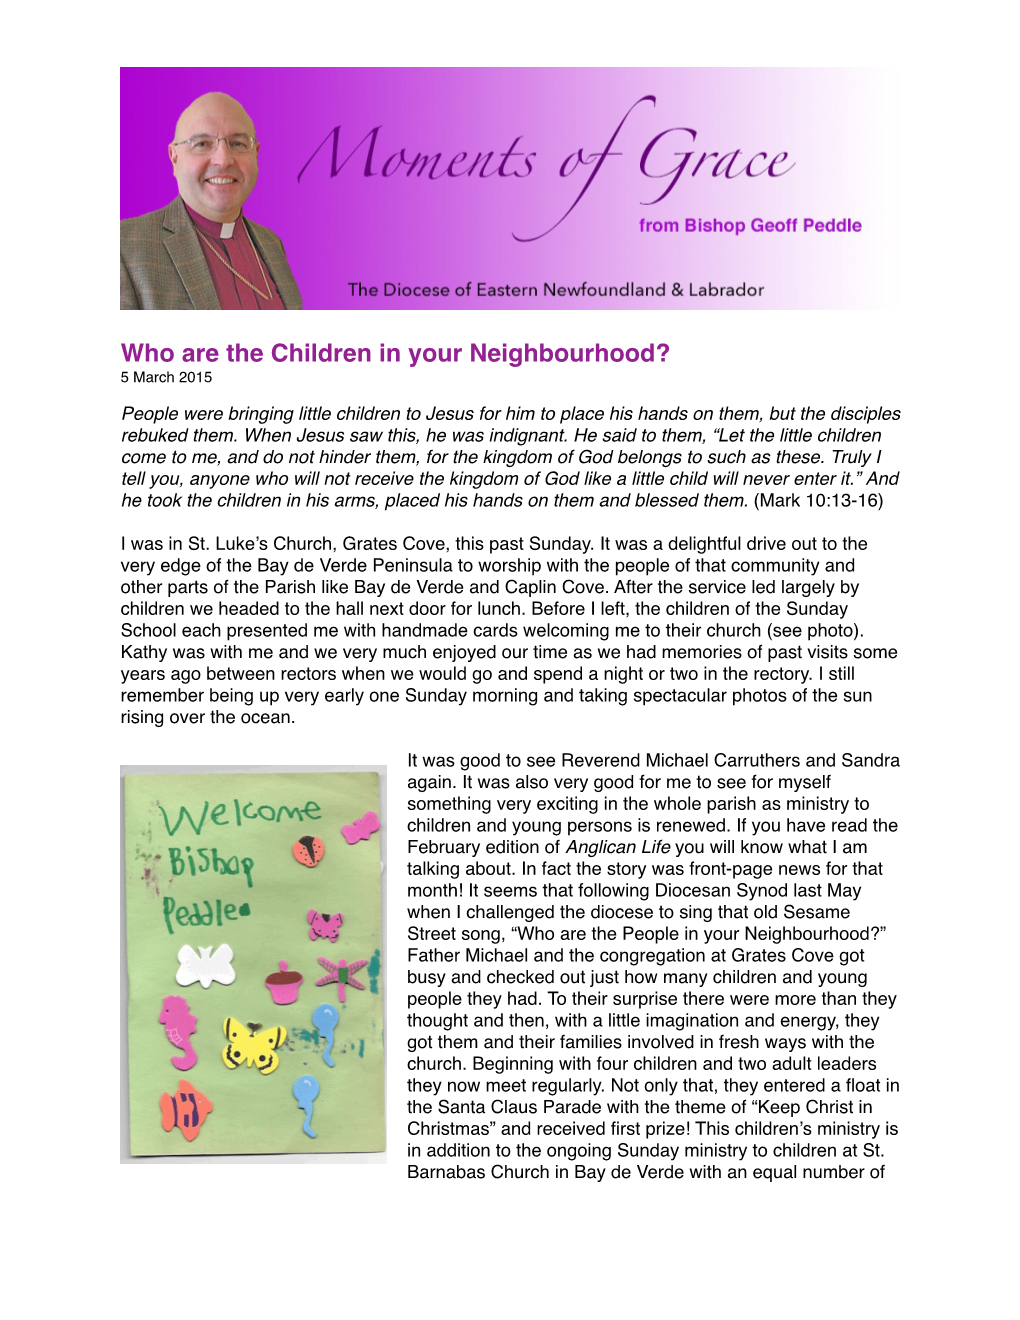 Who Are the Children in Your Neighbourhood? 5 March 2015